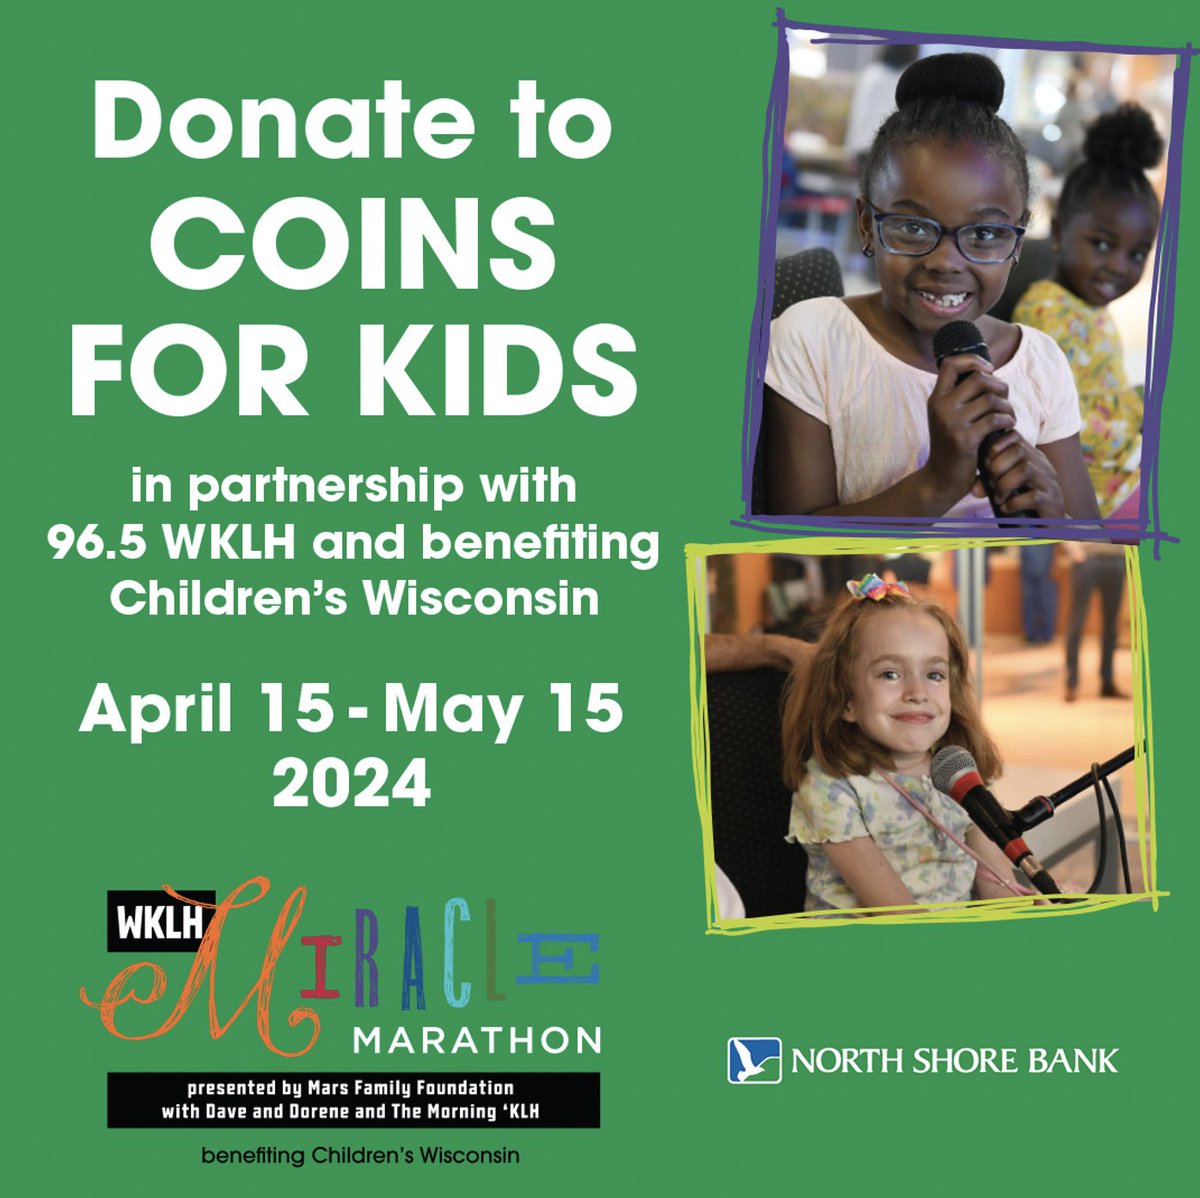 Support @965WKLH's Miracle Marathon for @childrenswi by getting your coins counted for free at any SE WI North Shore Bank location through May 15. You can donate all or a portion of the total to Coins for Kids. bit.ly/49EE2t6 Member FDIC | Equal Housing Lender